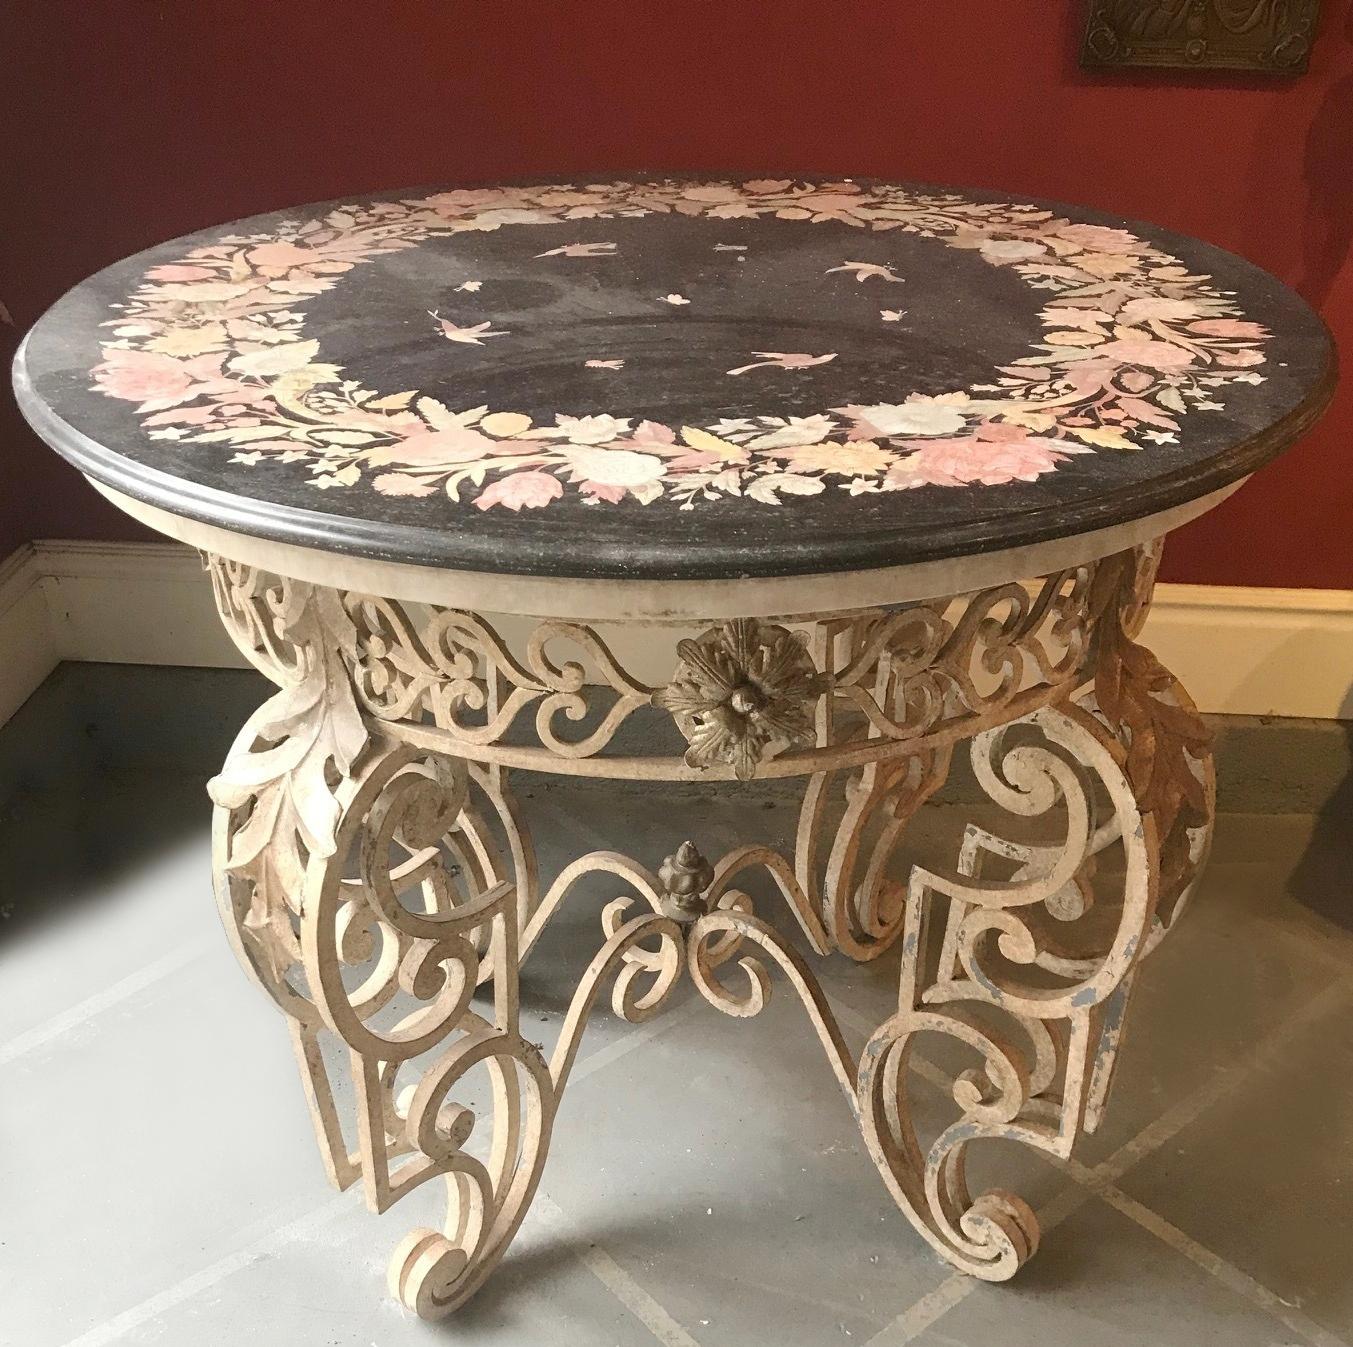 Hand-Crafted Patio Iron Table with Inlaid Marble Top